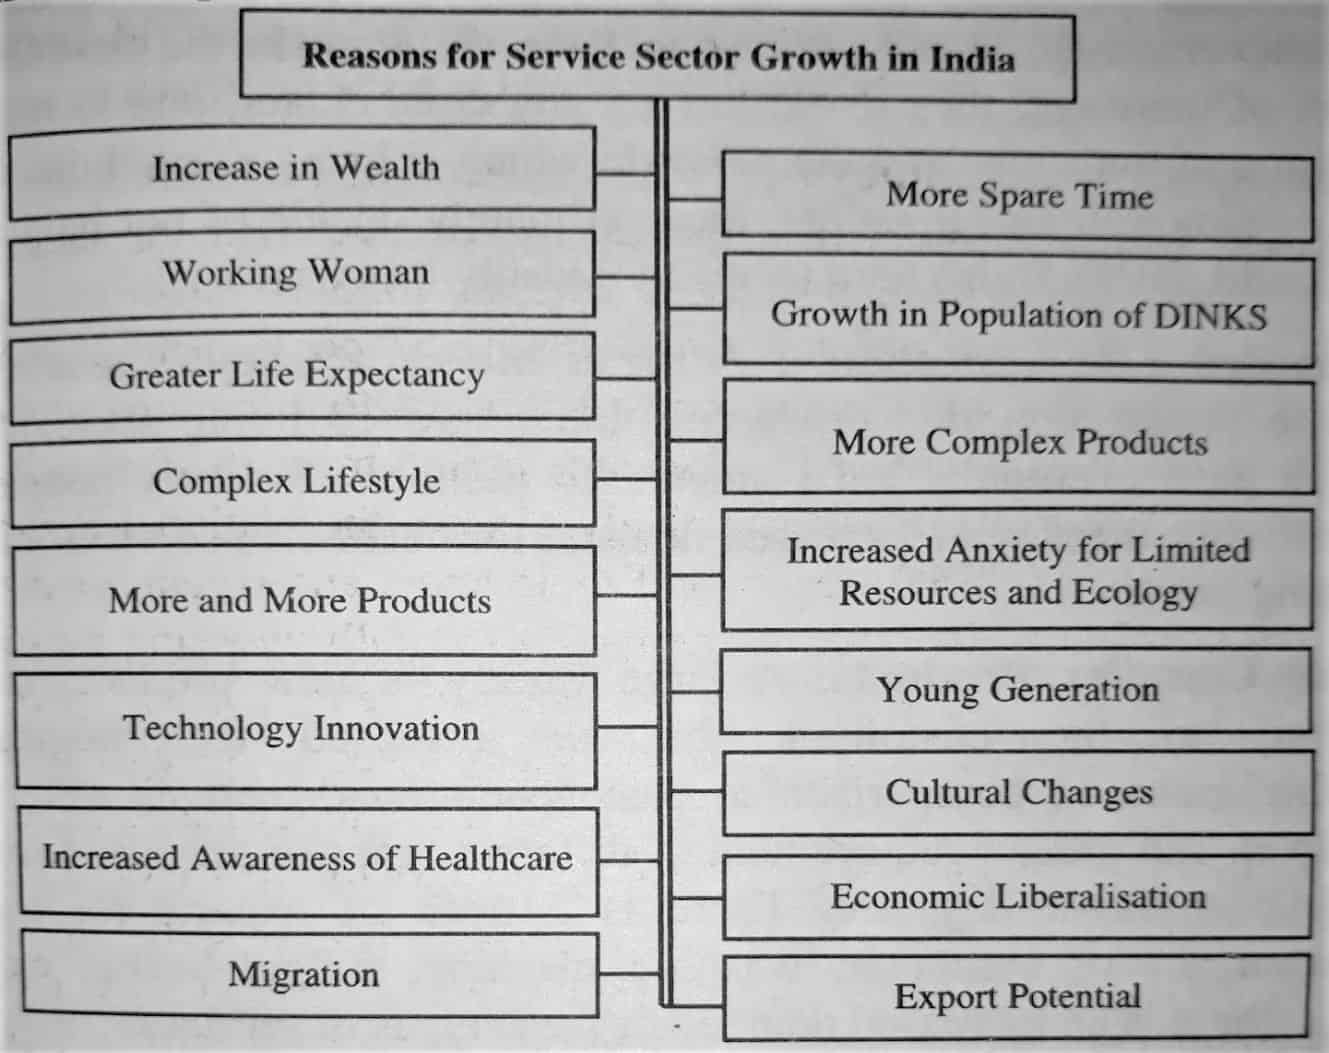 Reasons for Service Sector Growth in India